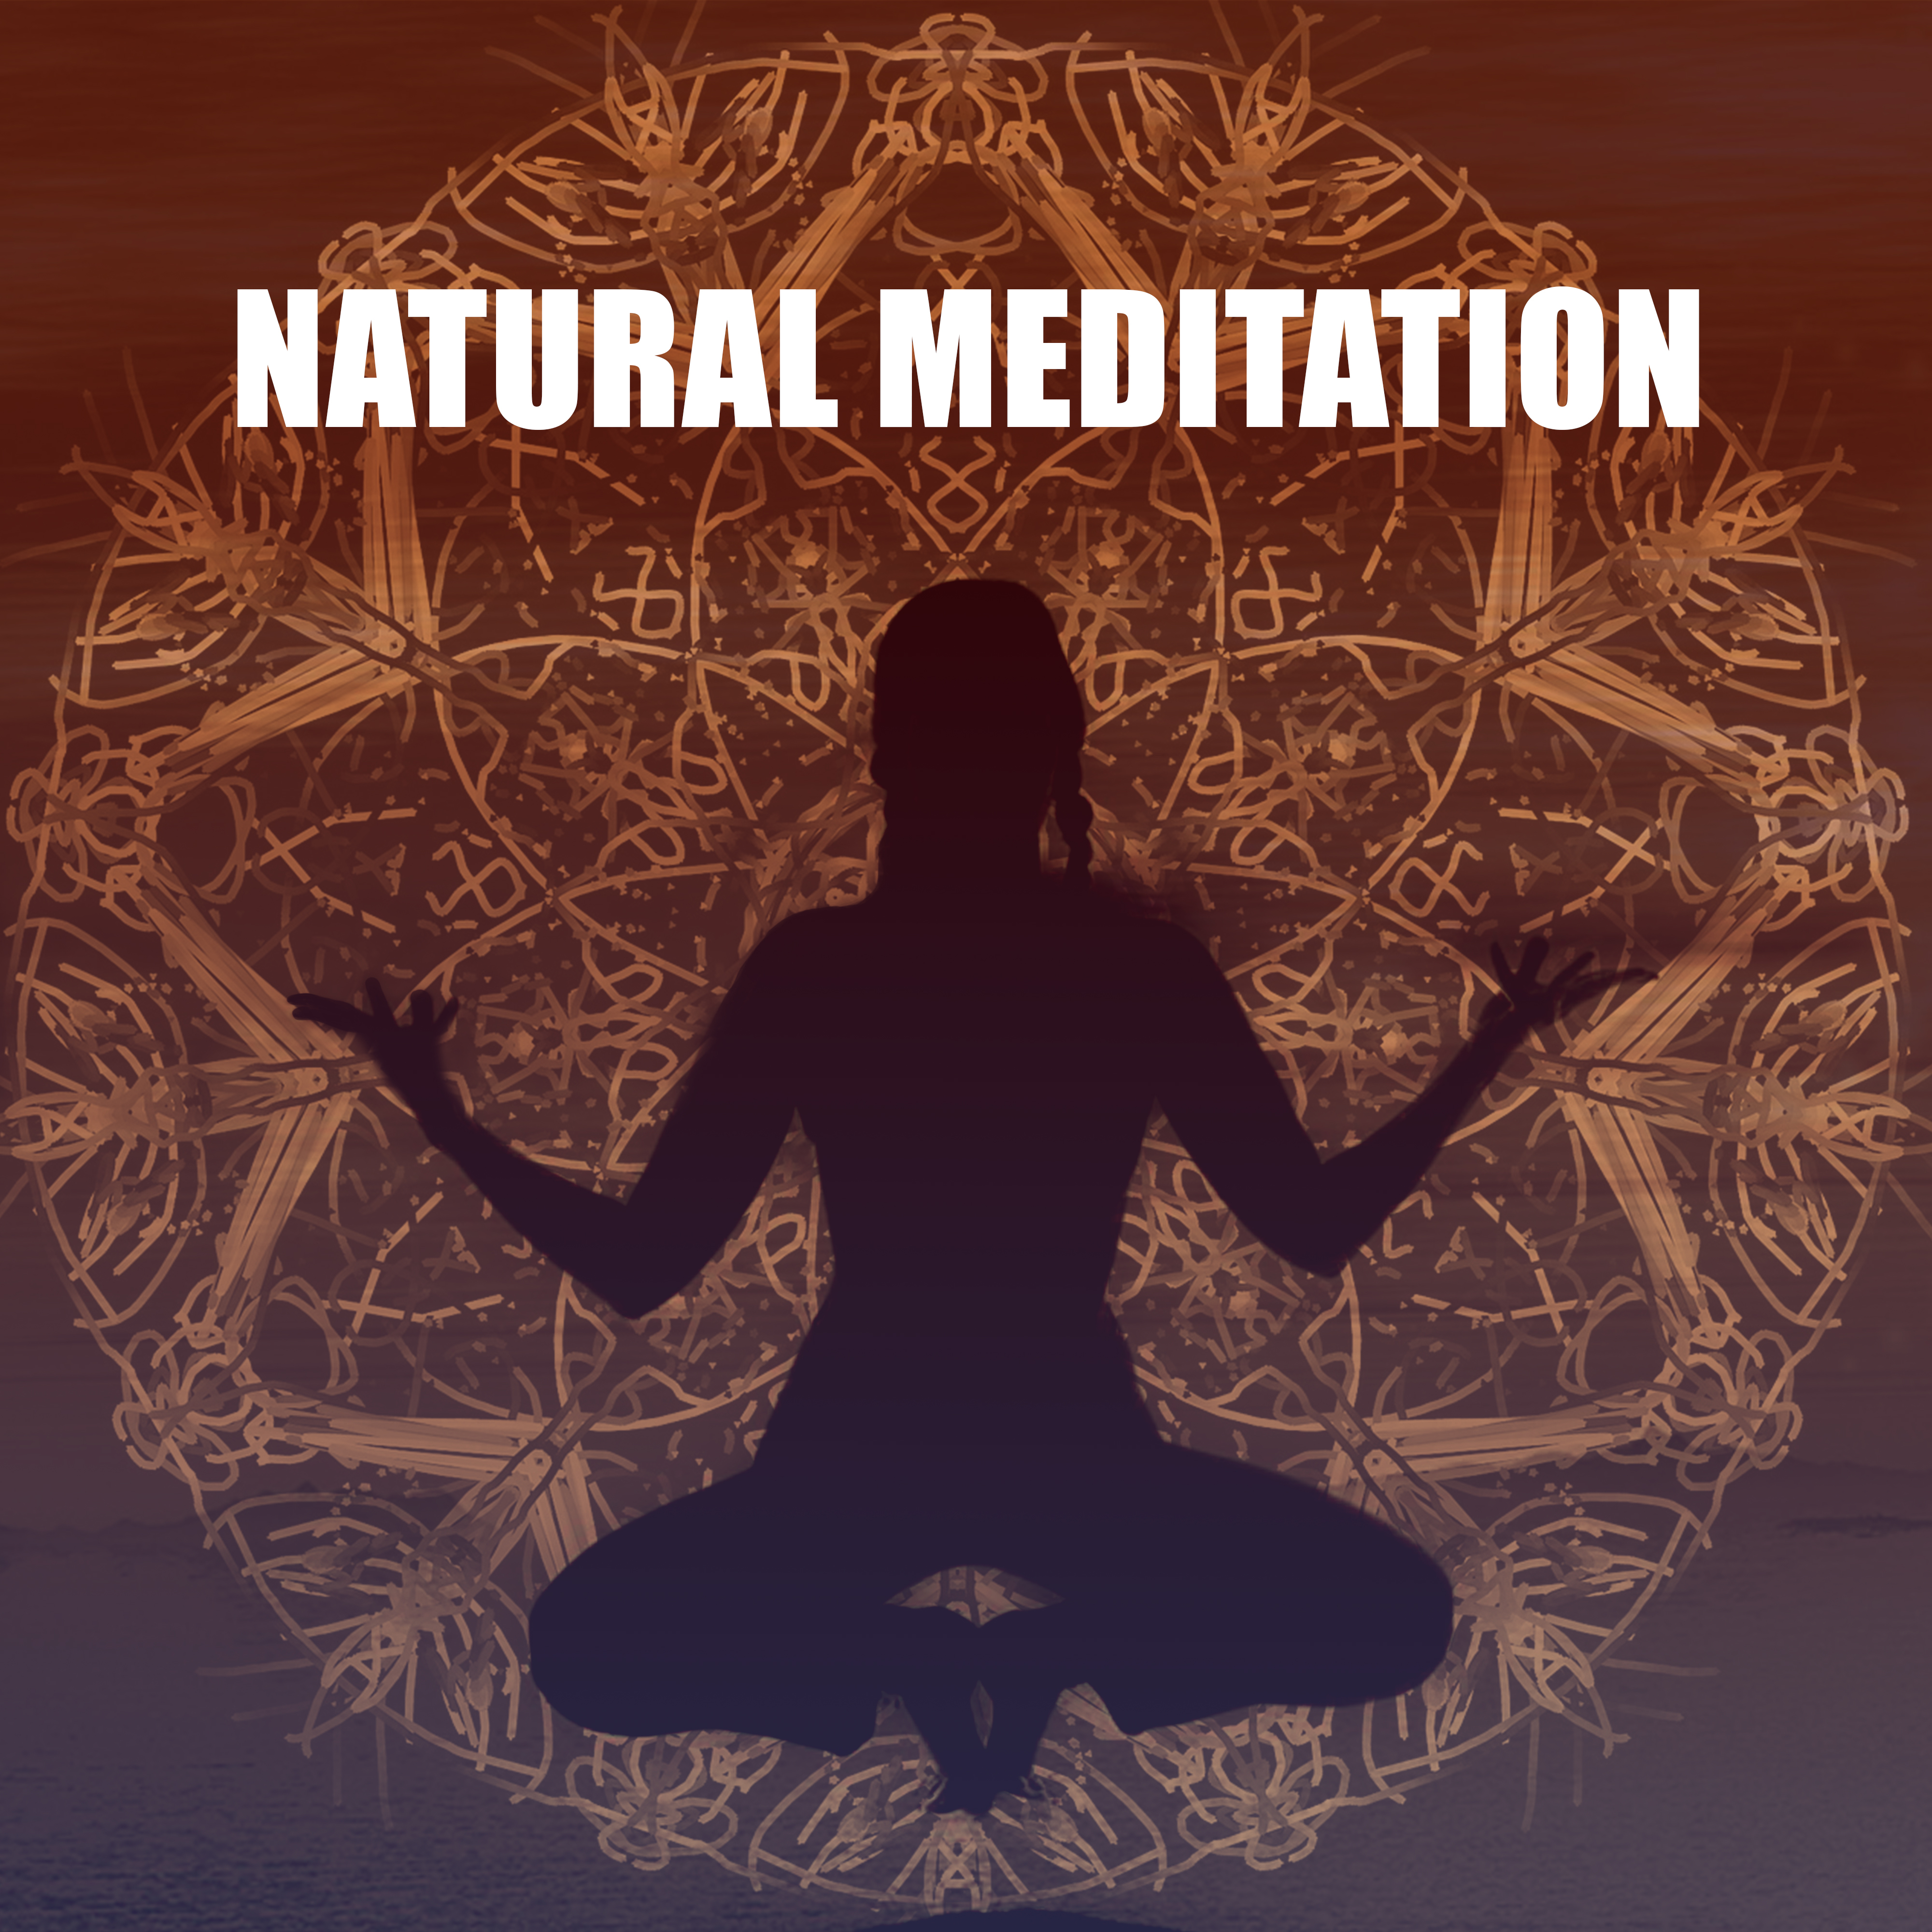 Natural Meditation – Relaxing Music, Soft Nature Sounds, Yoga Practice, Mindfulness, Rest